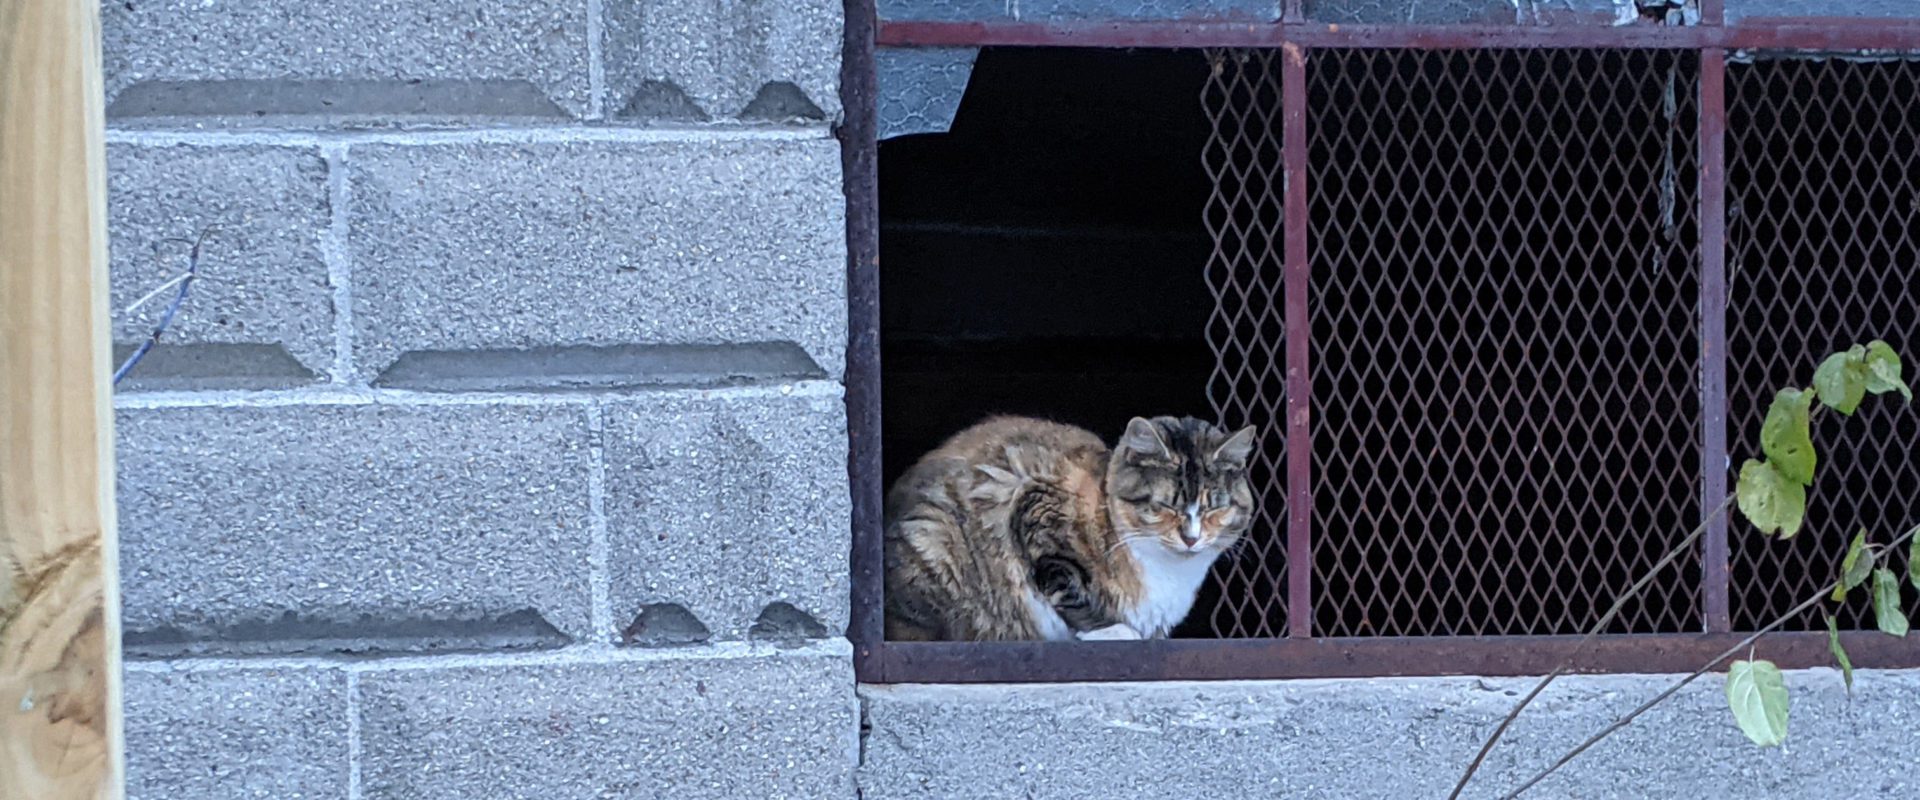 Cat sitting in abandoned building window